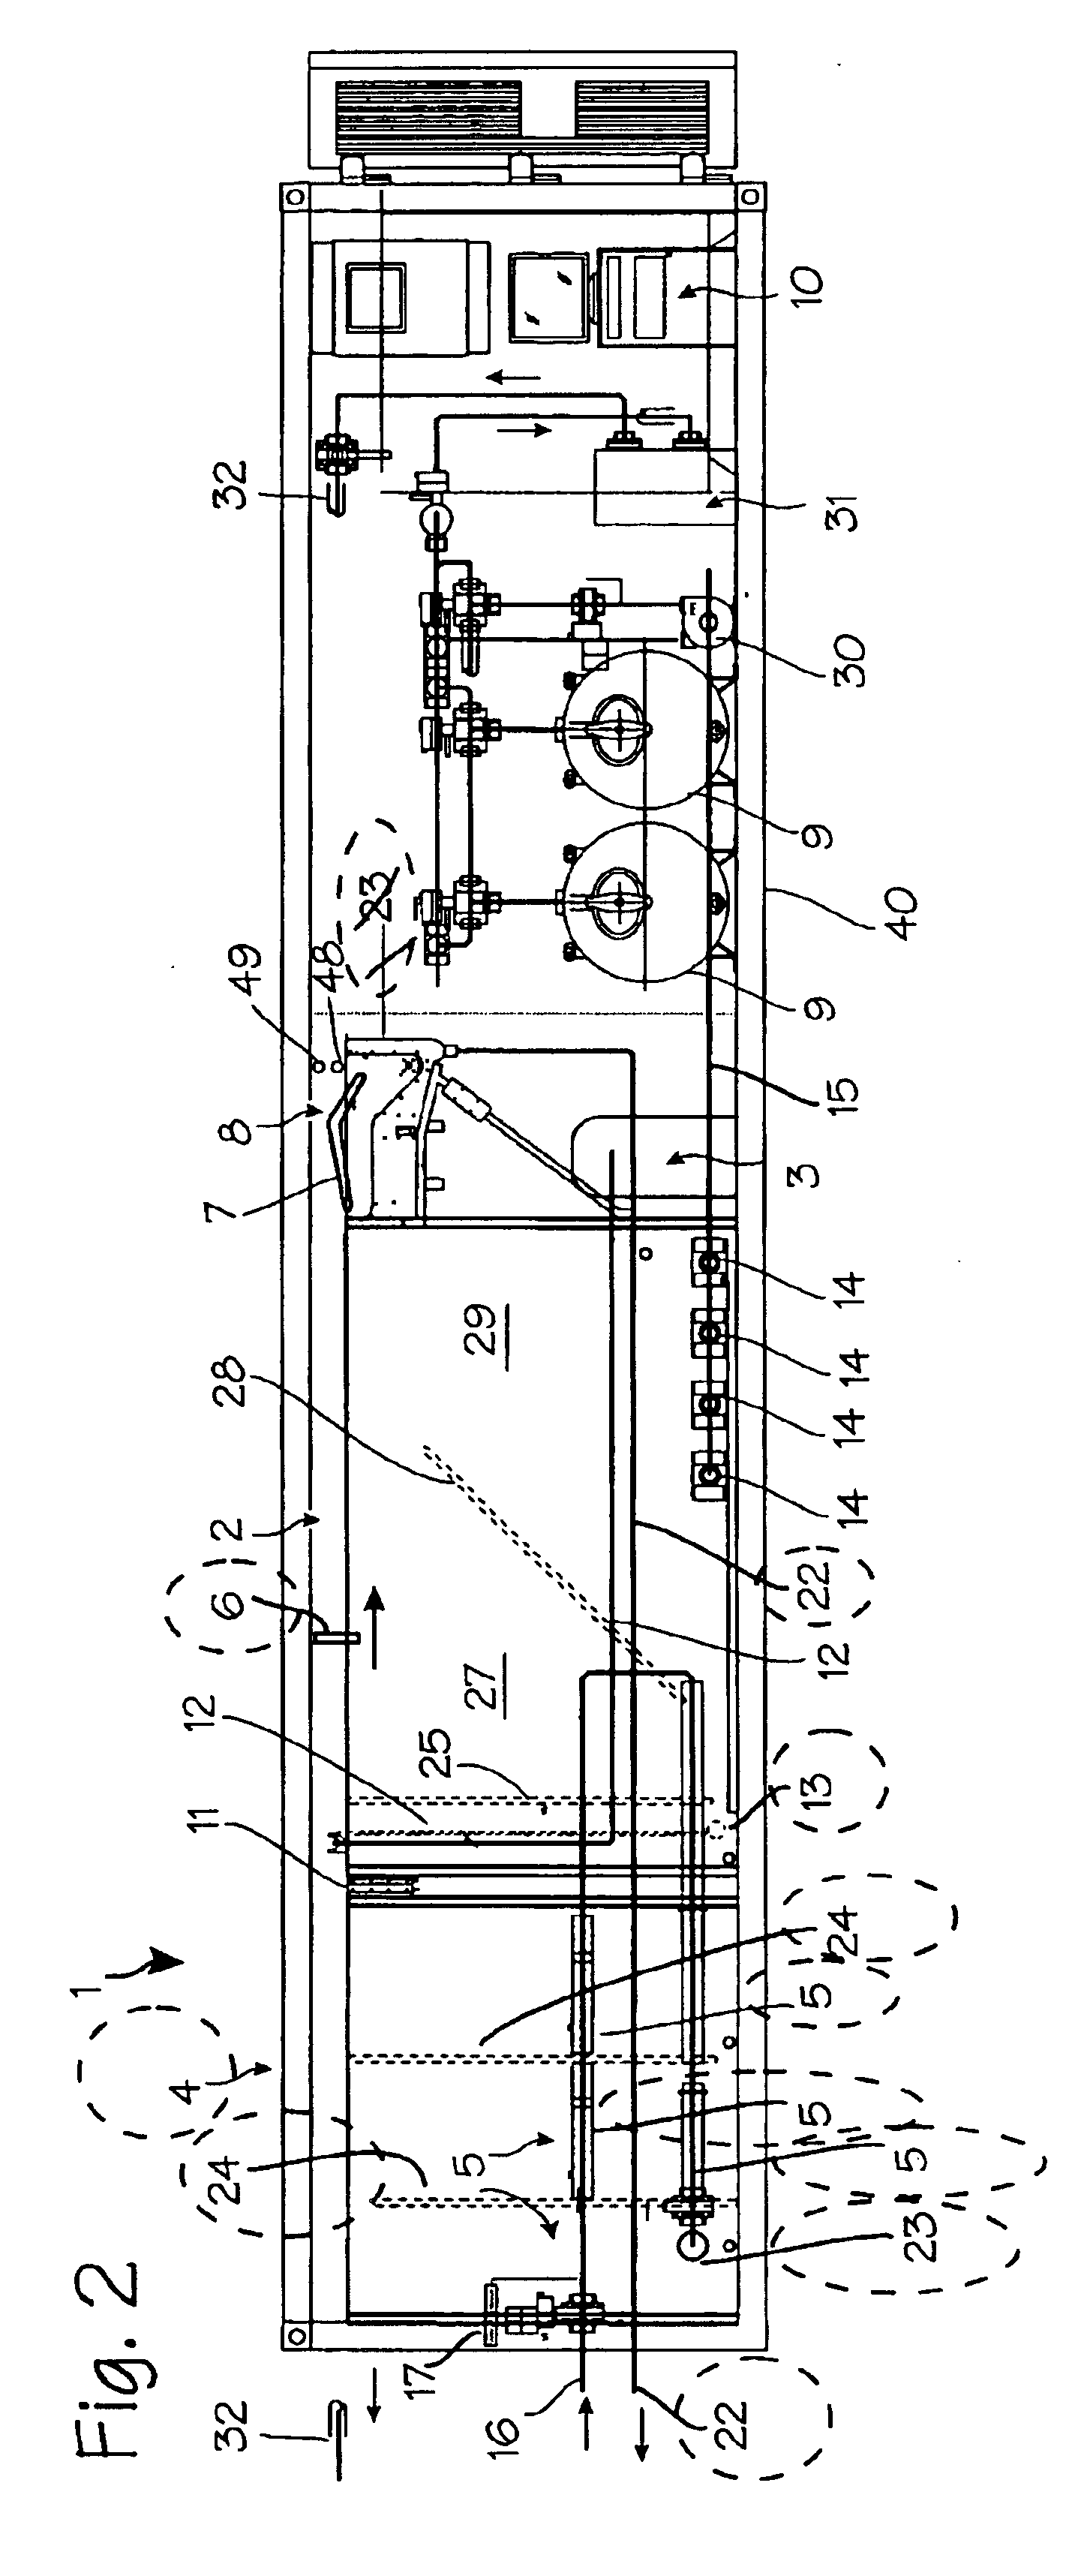 Self contained dissolved air flotation system